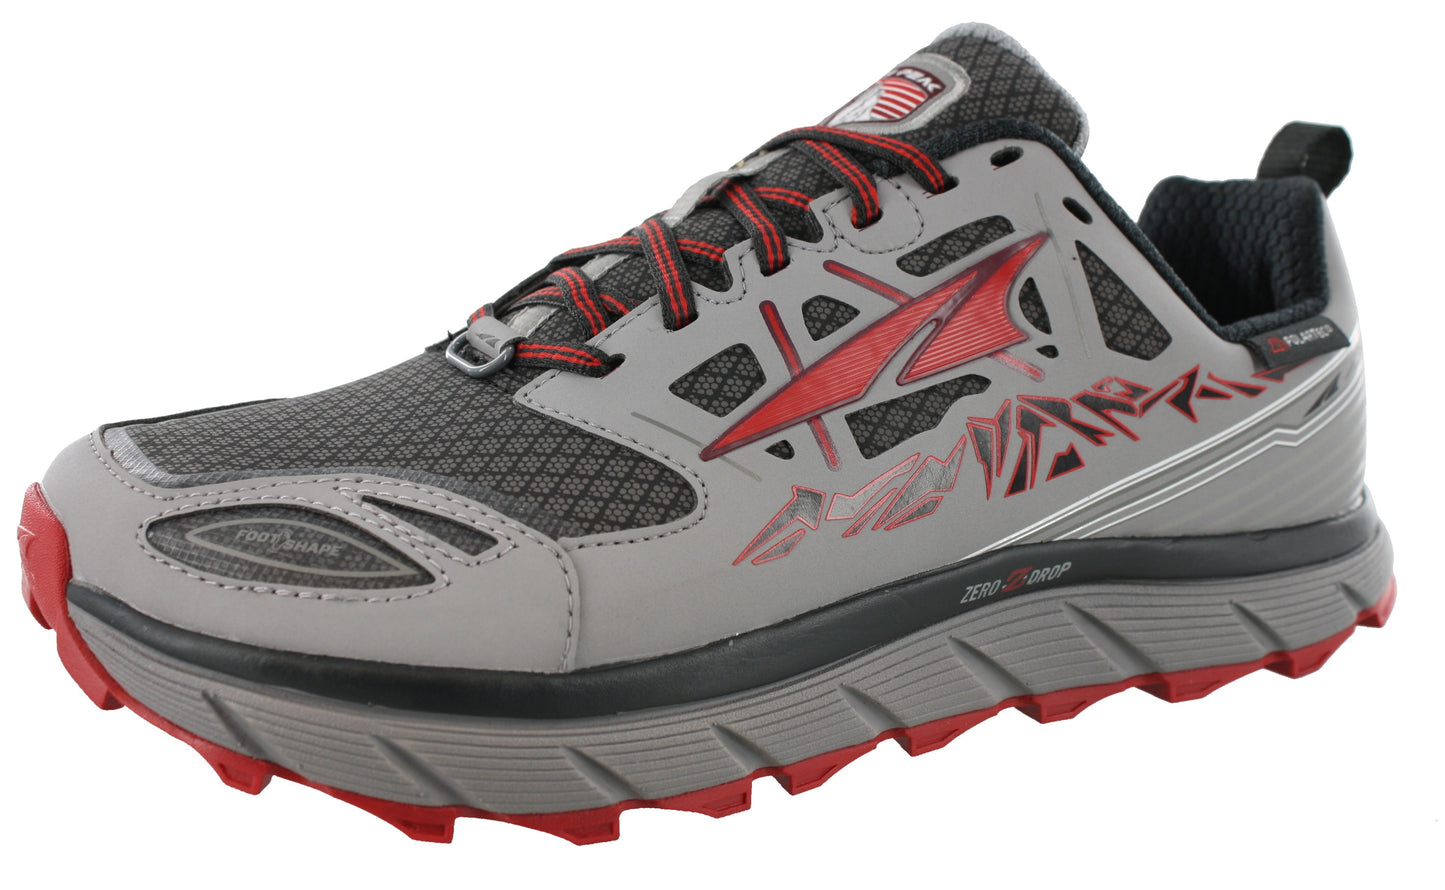 Lateral of Gray/Red3.0 Altra Mens Trail Running Lightweight Shoes Lone Peak 3.0 Neoshell